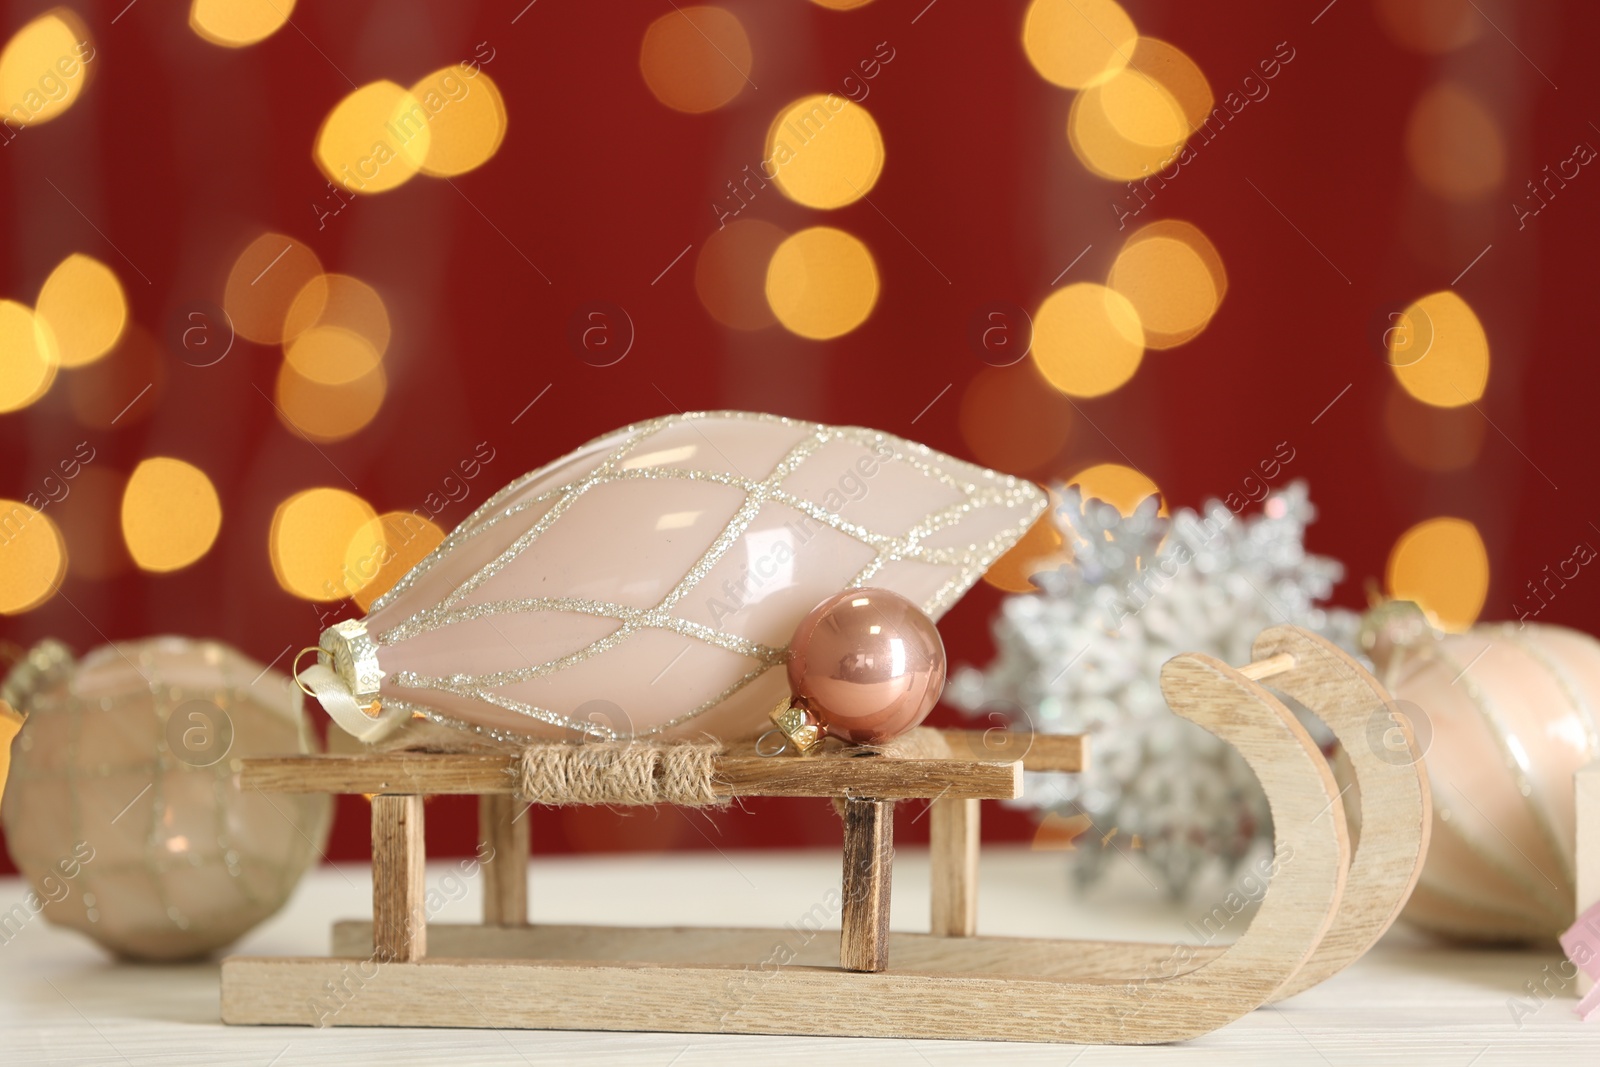 Photo of Decorative sleigh with Christmas ornaments on white table against blurred lights